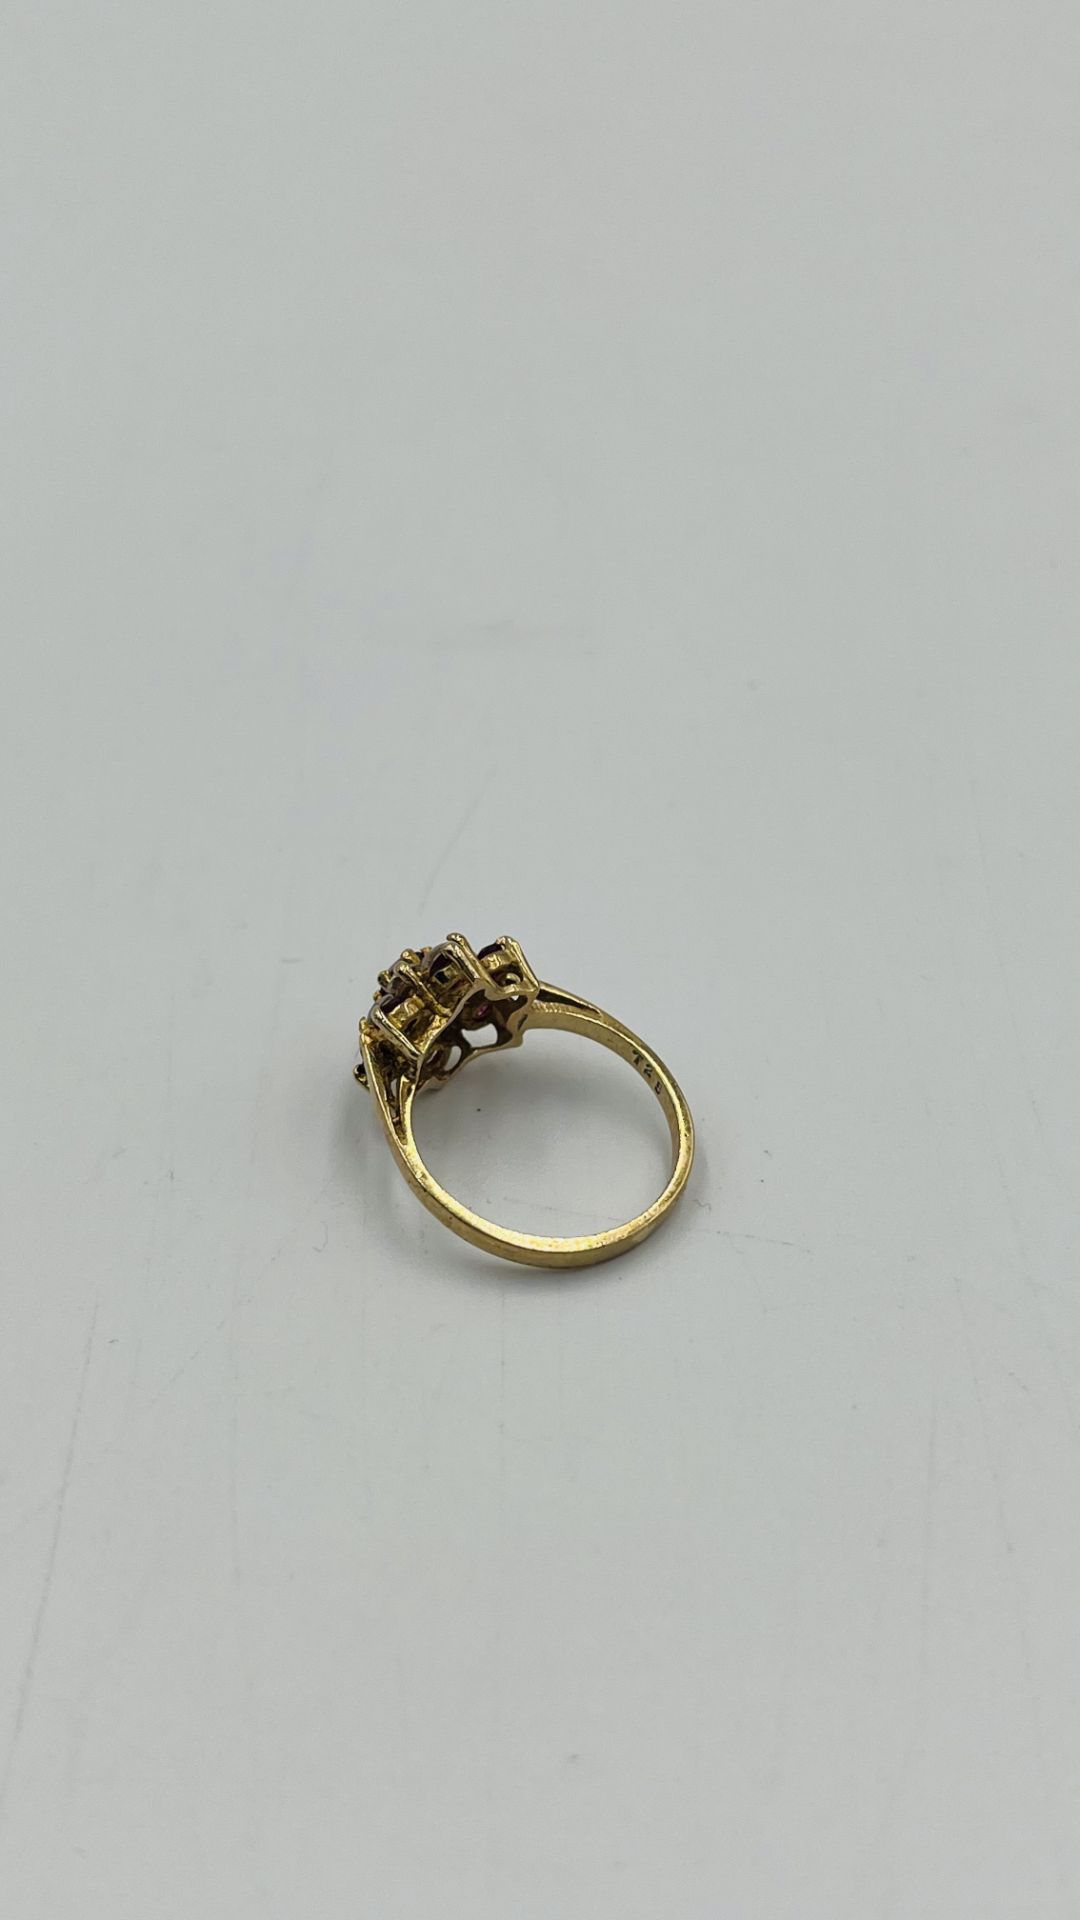 9ct gold daisy ring - Image 4 of 7